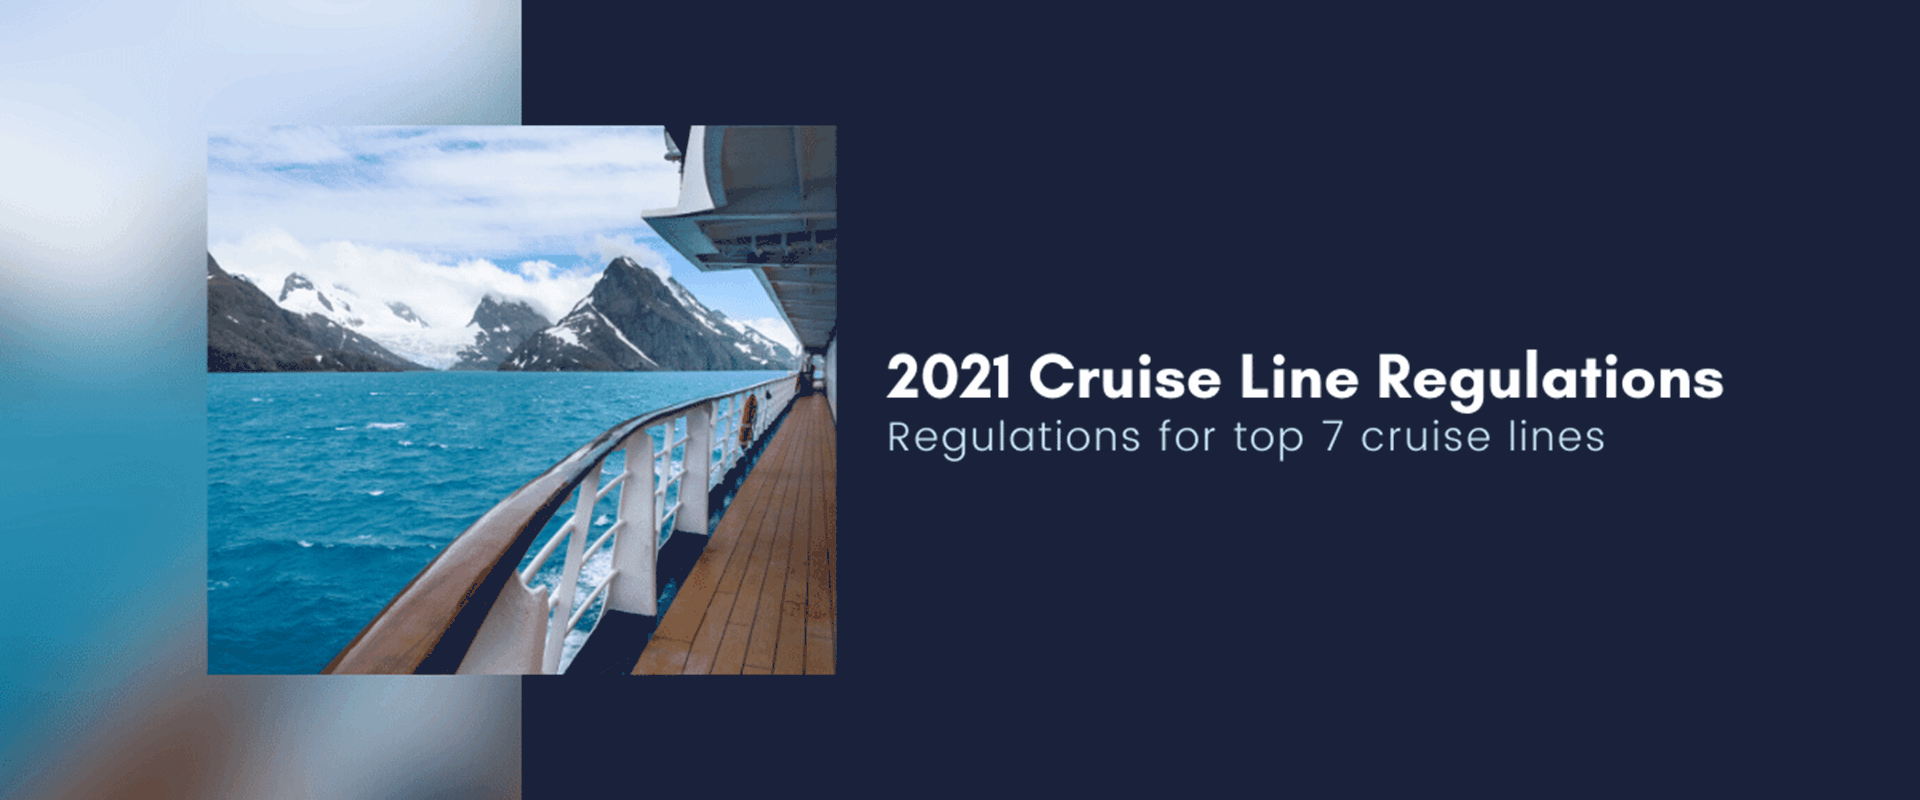 Top 7 Cruise Line Covid-19 Regulations